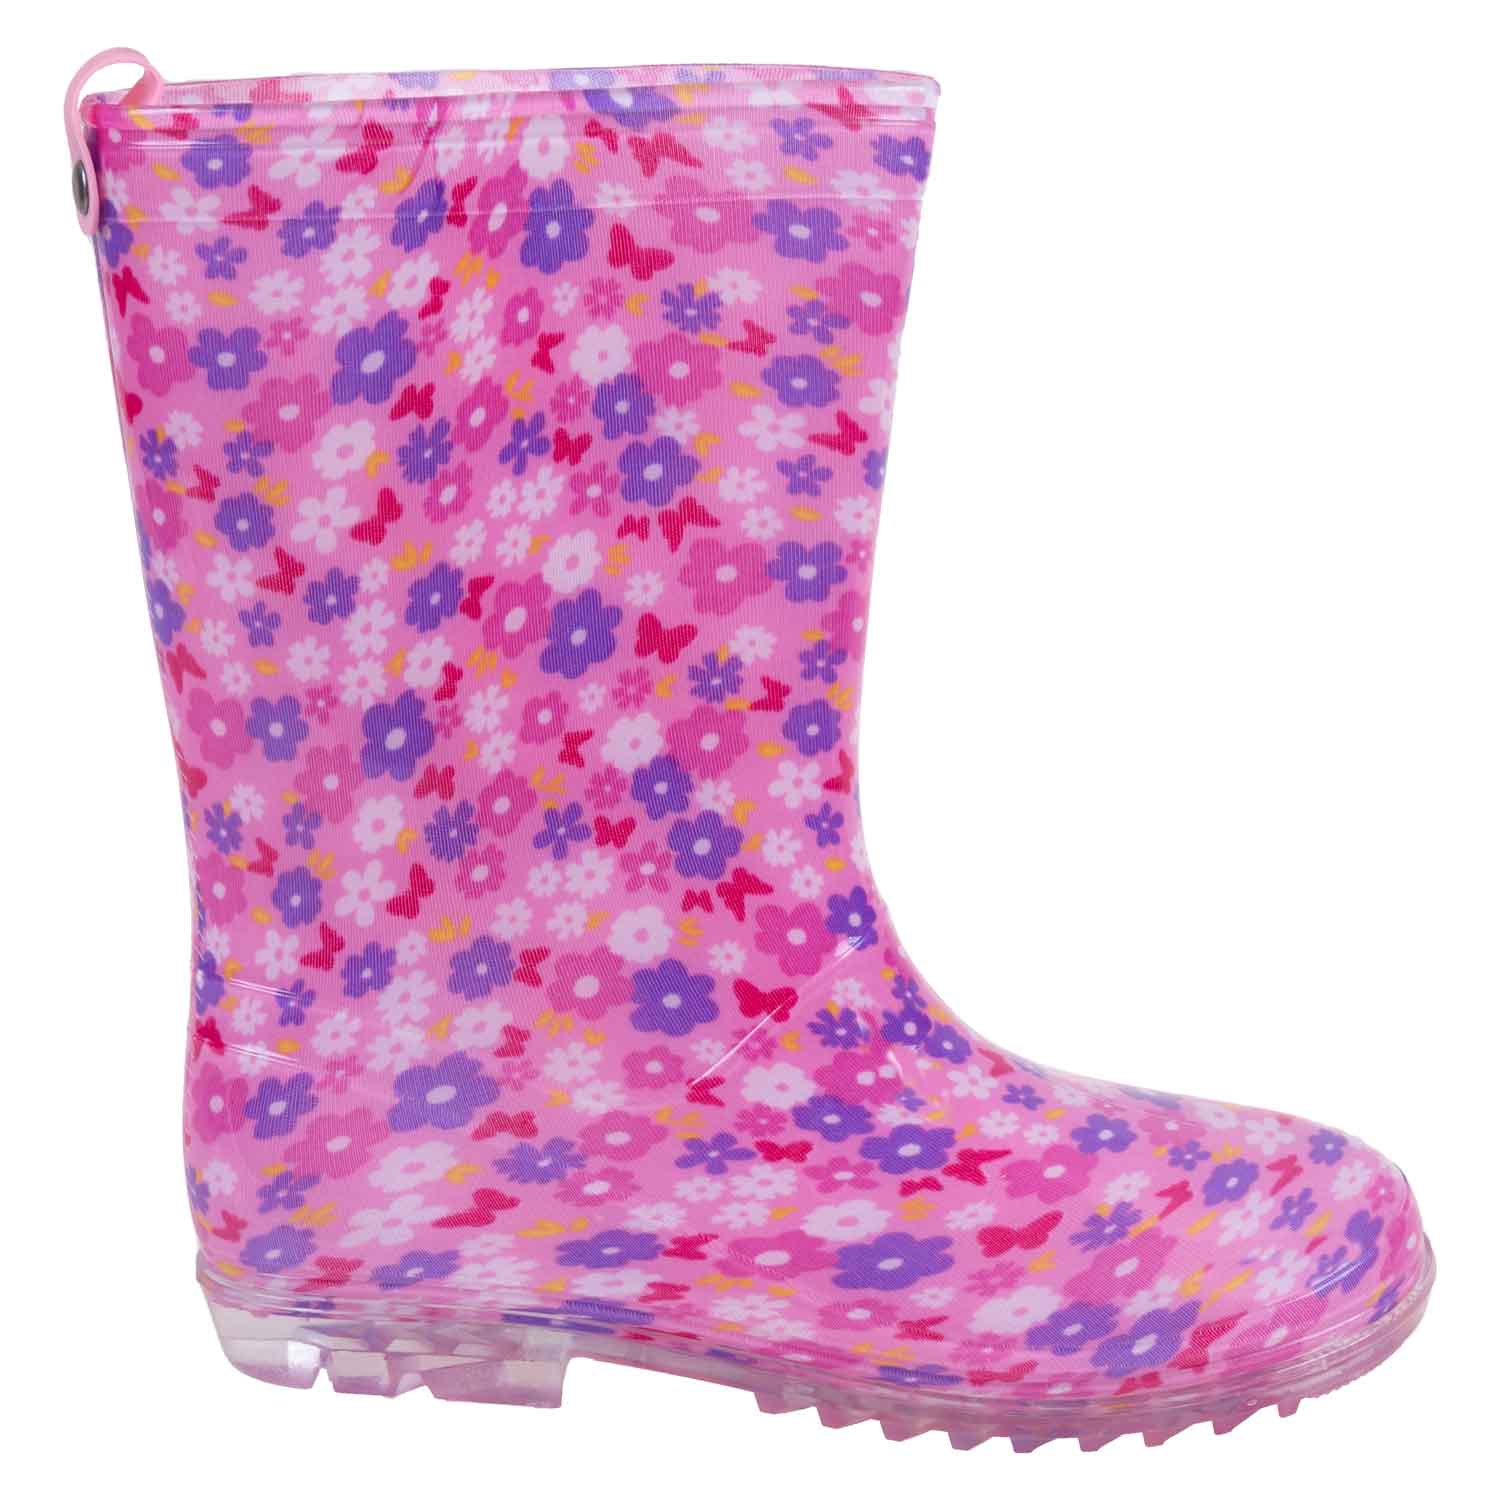 Rubber rain boots - Ditsy daisies, size 1